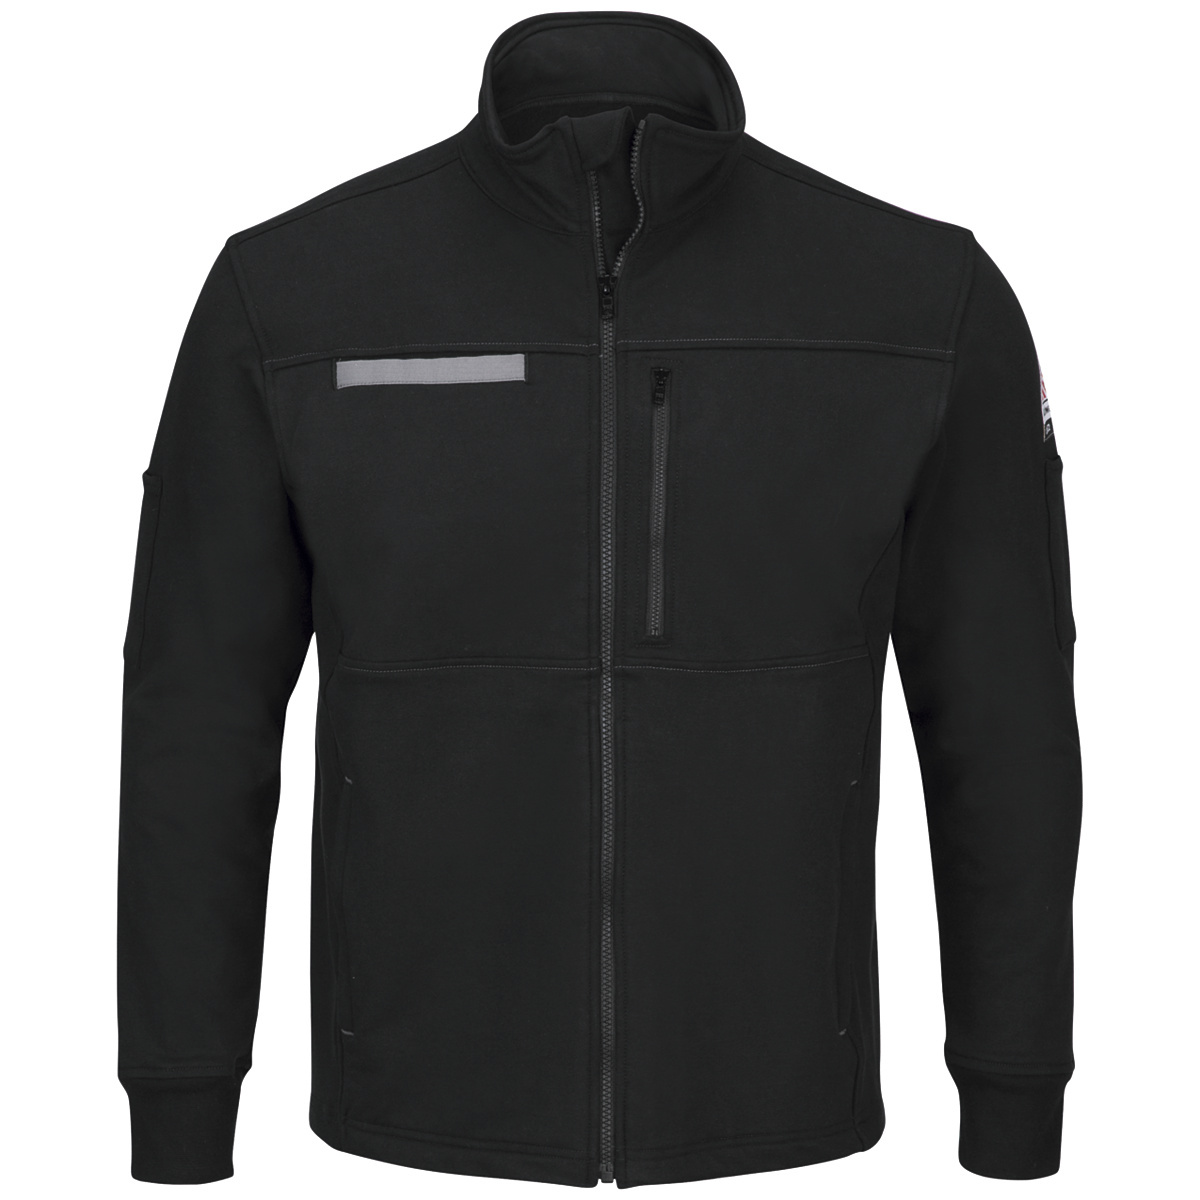 Bulwark® Medium Tall Black Cotton/Spandex Flame Resistant Jacket With Zipper Front Closure